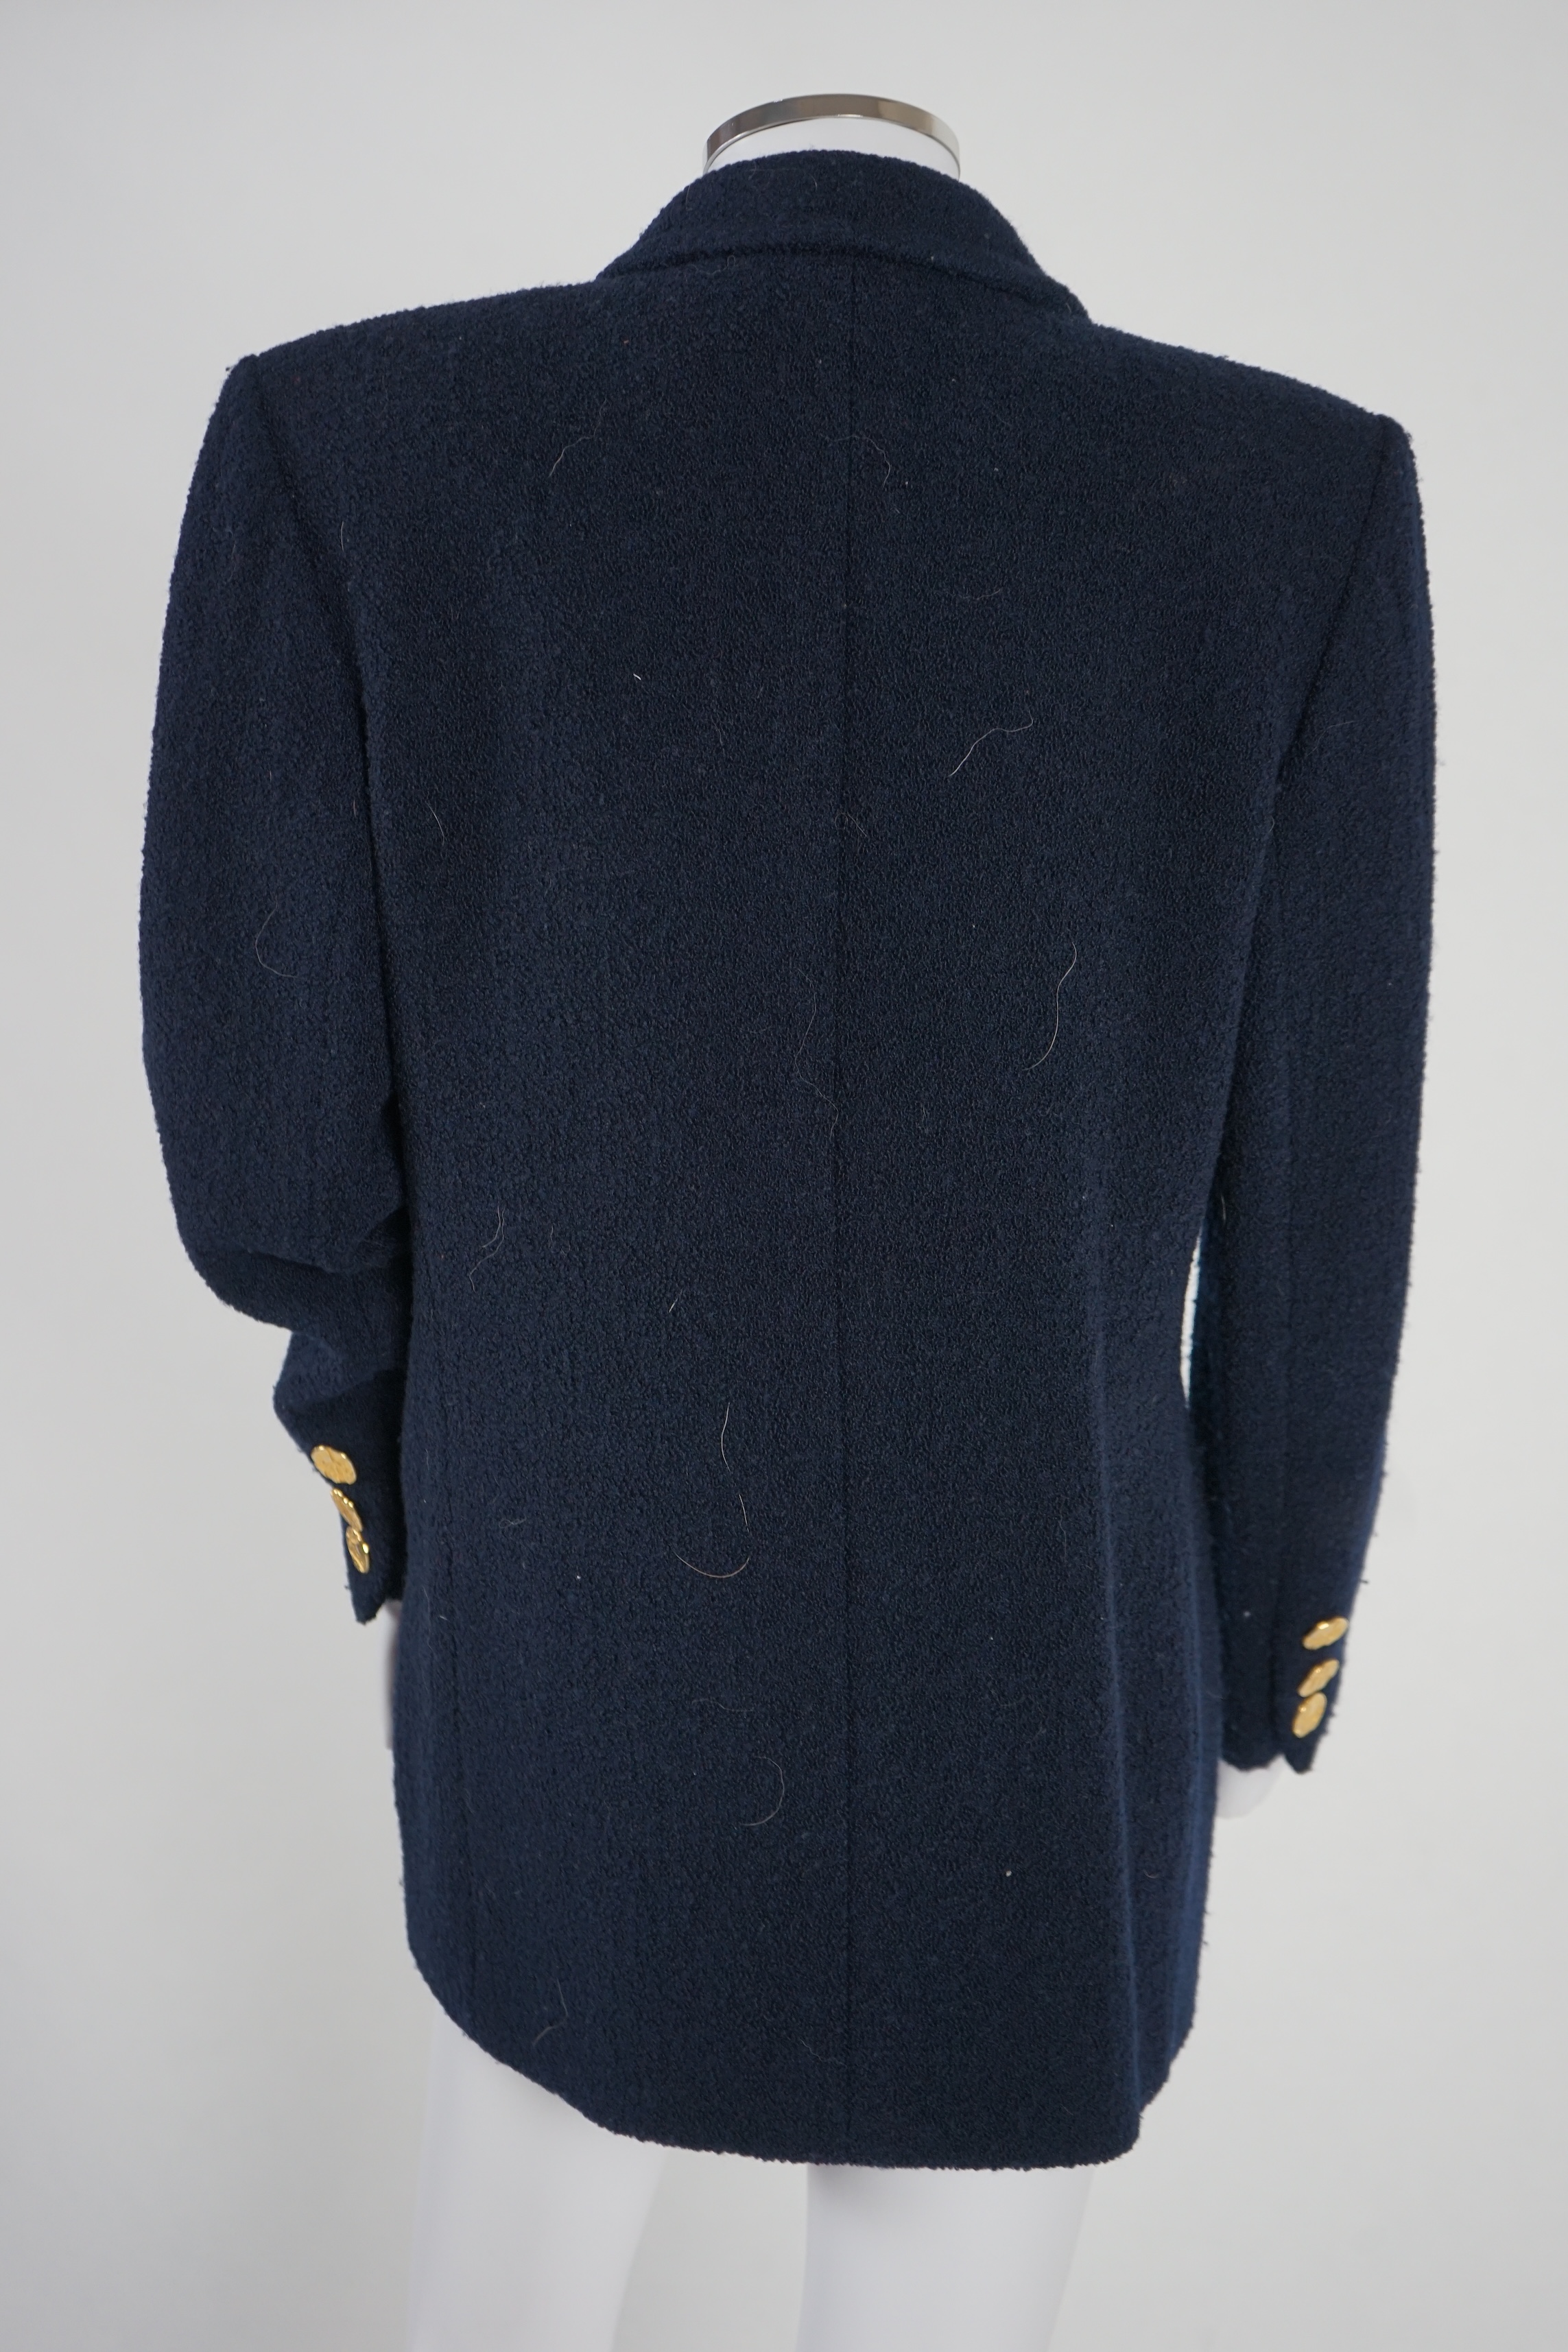 A vintage Yves Saint Laurent variation lady's navy blue wool textured blazer, F 40 (UK 12). Proceeds to Happy Paws Puppy Rescue